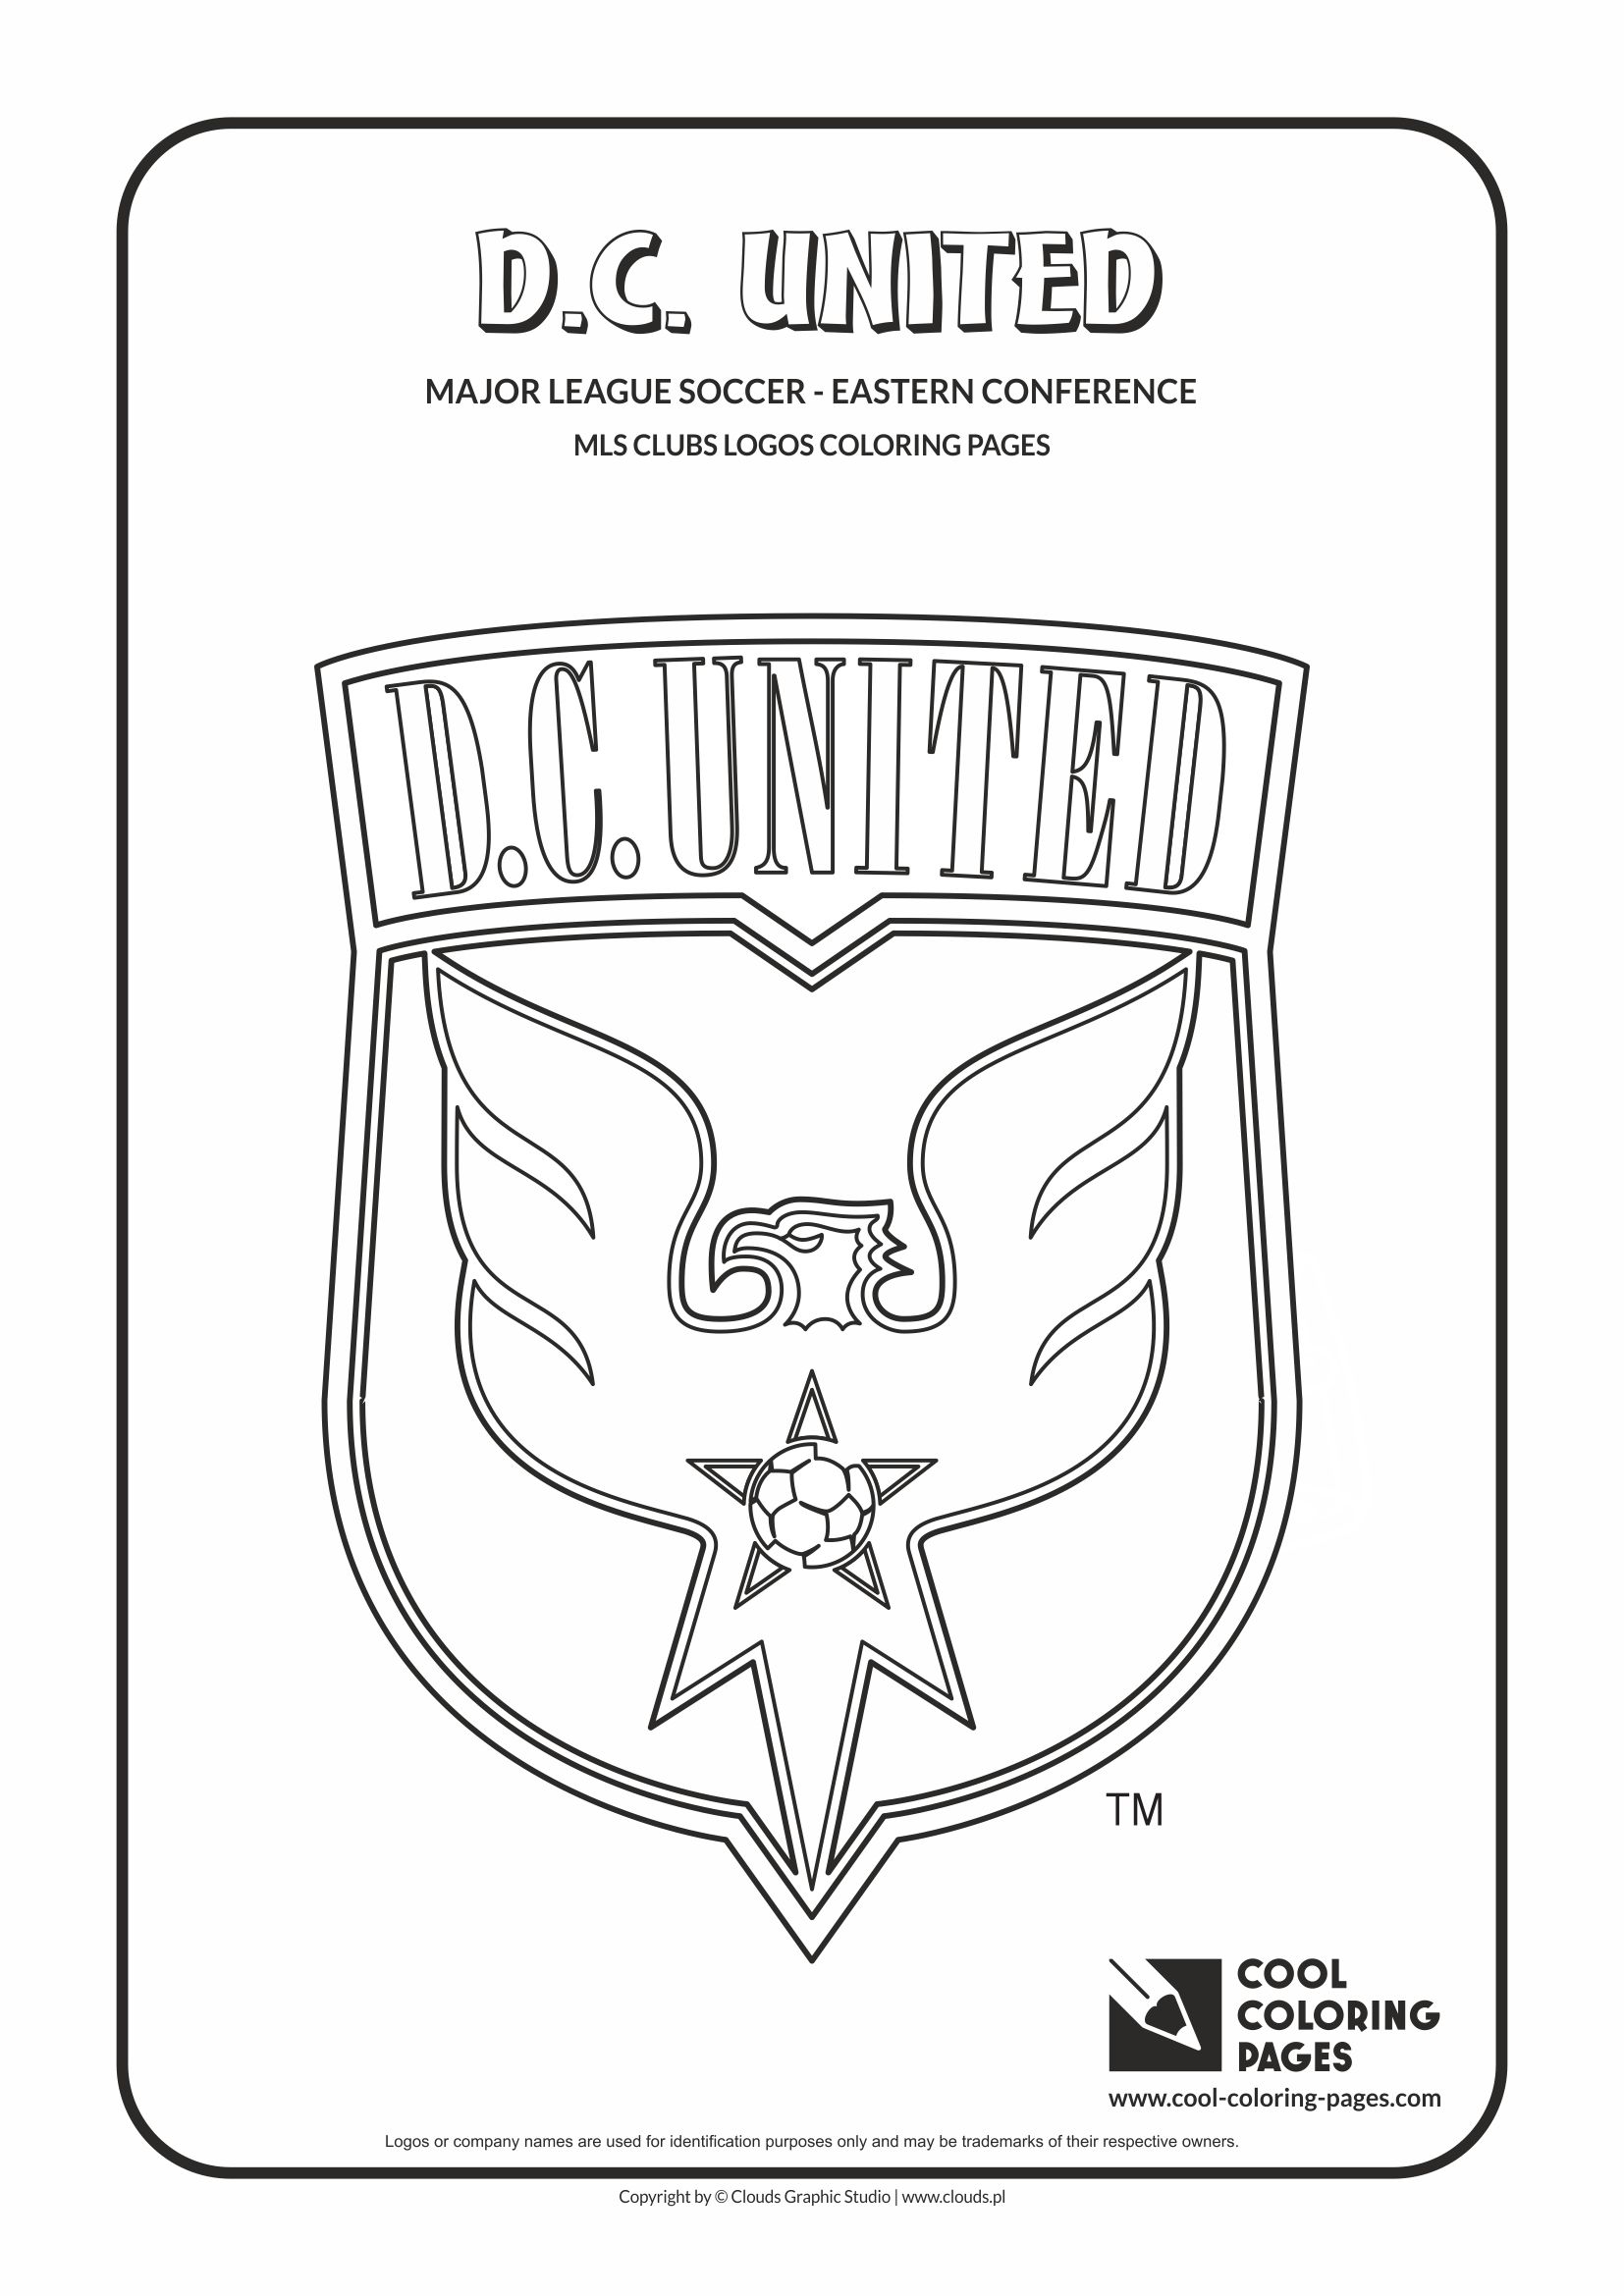 Cool Coloring Pages - Major League Soccer Logos - Eastern Conference / D.C. United logo / Coloring page with D.C. United logo